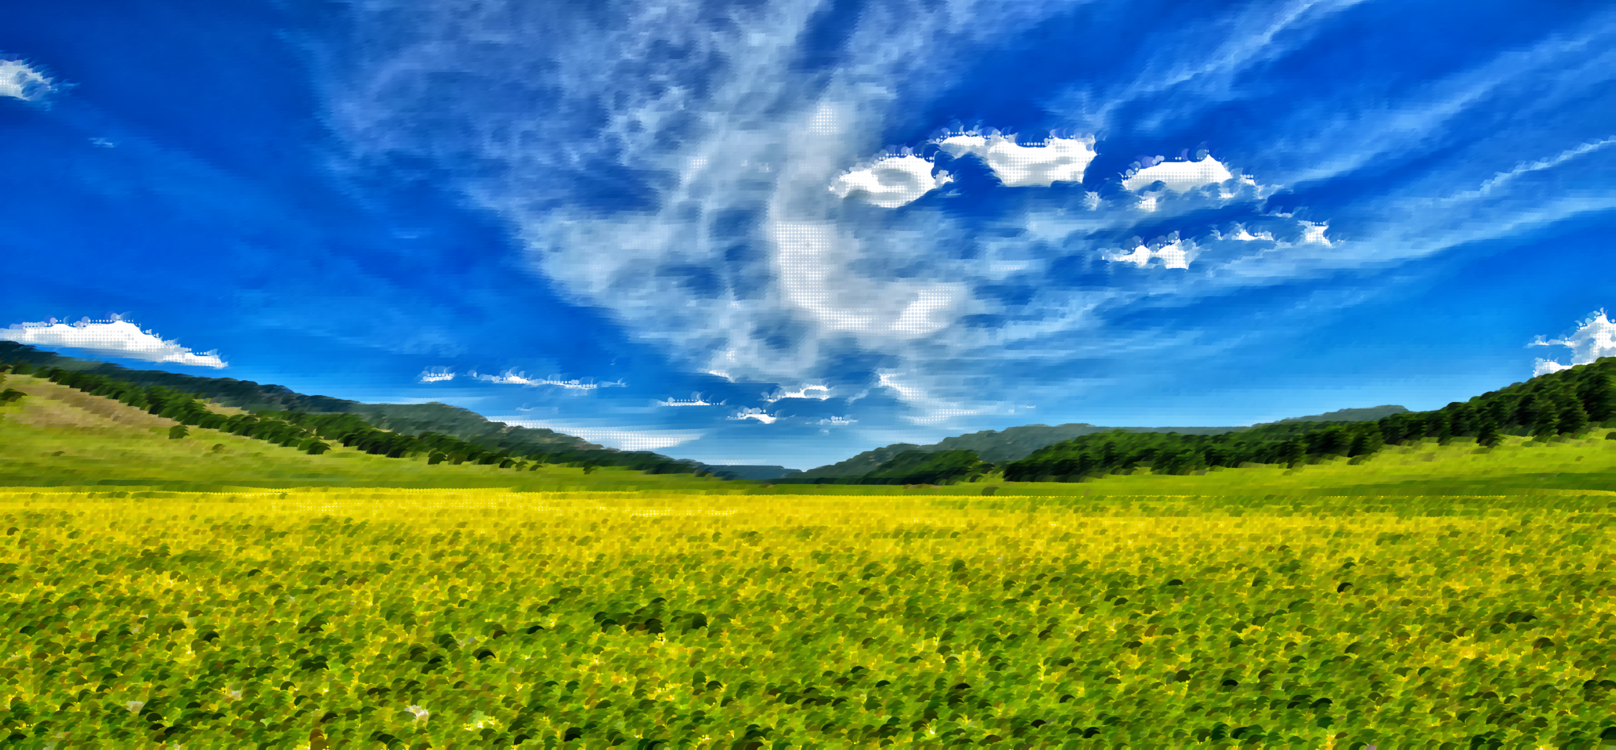 Atmosphere,Meadow,Canola